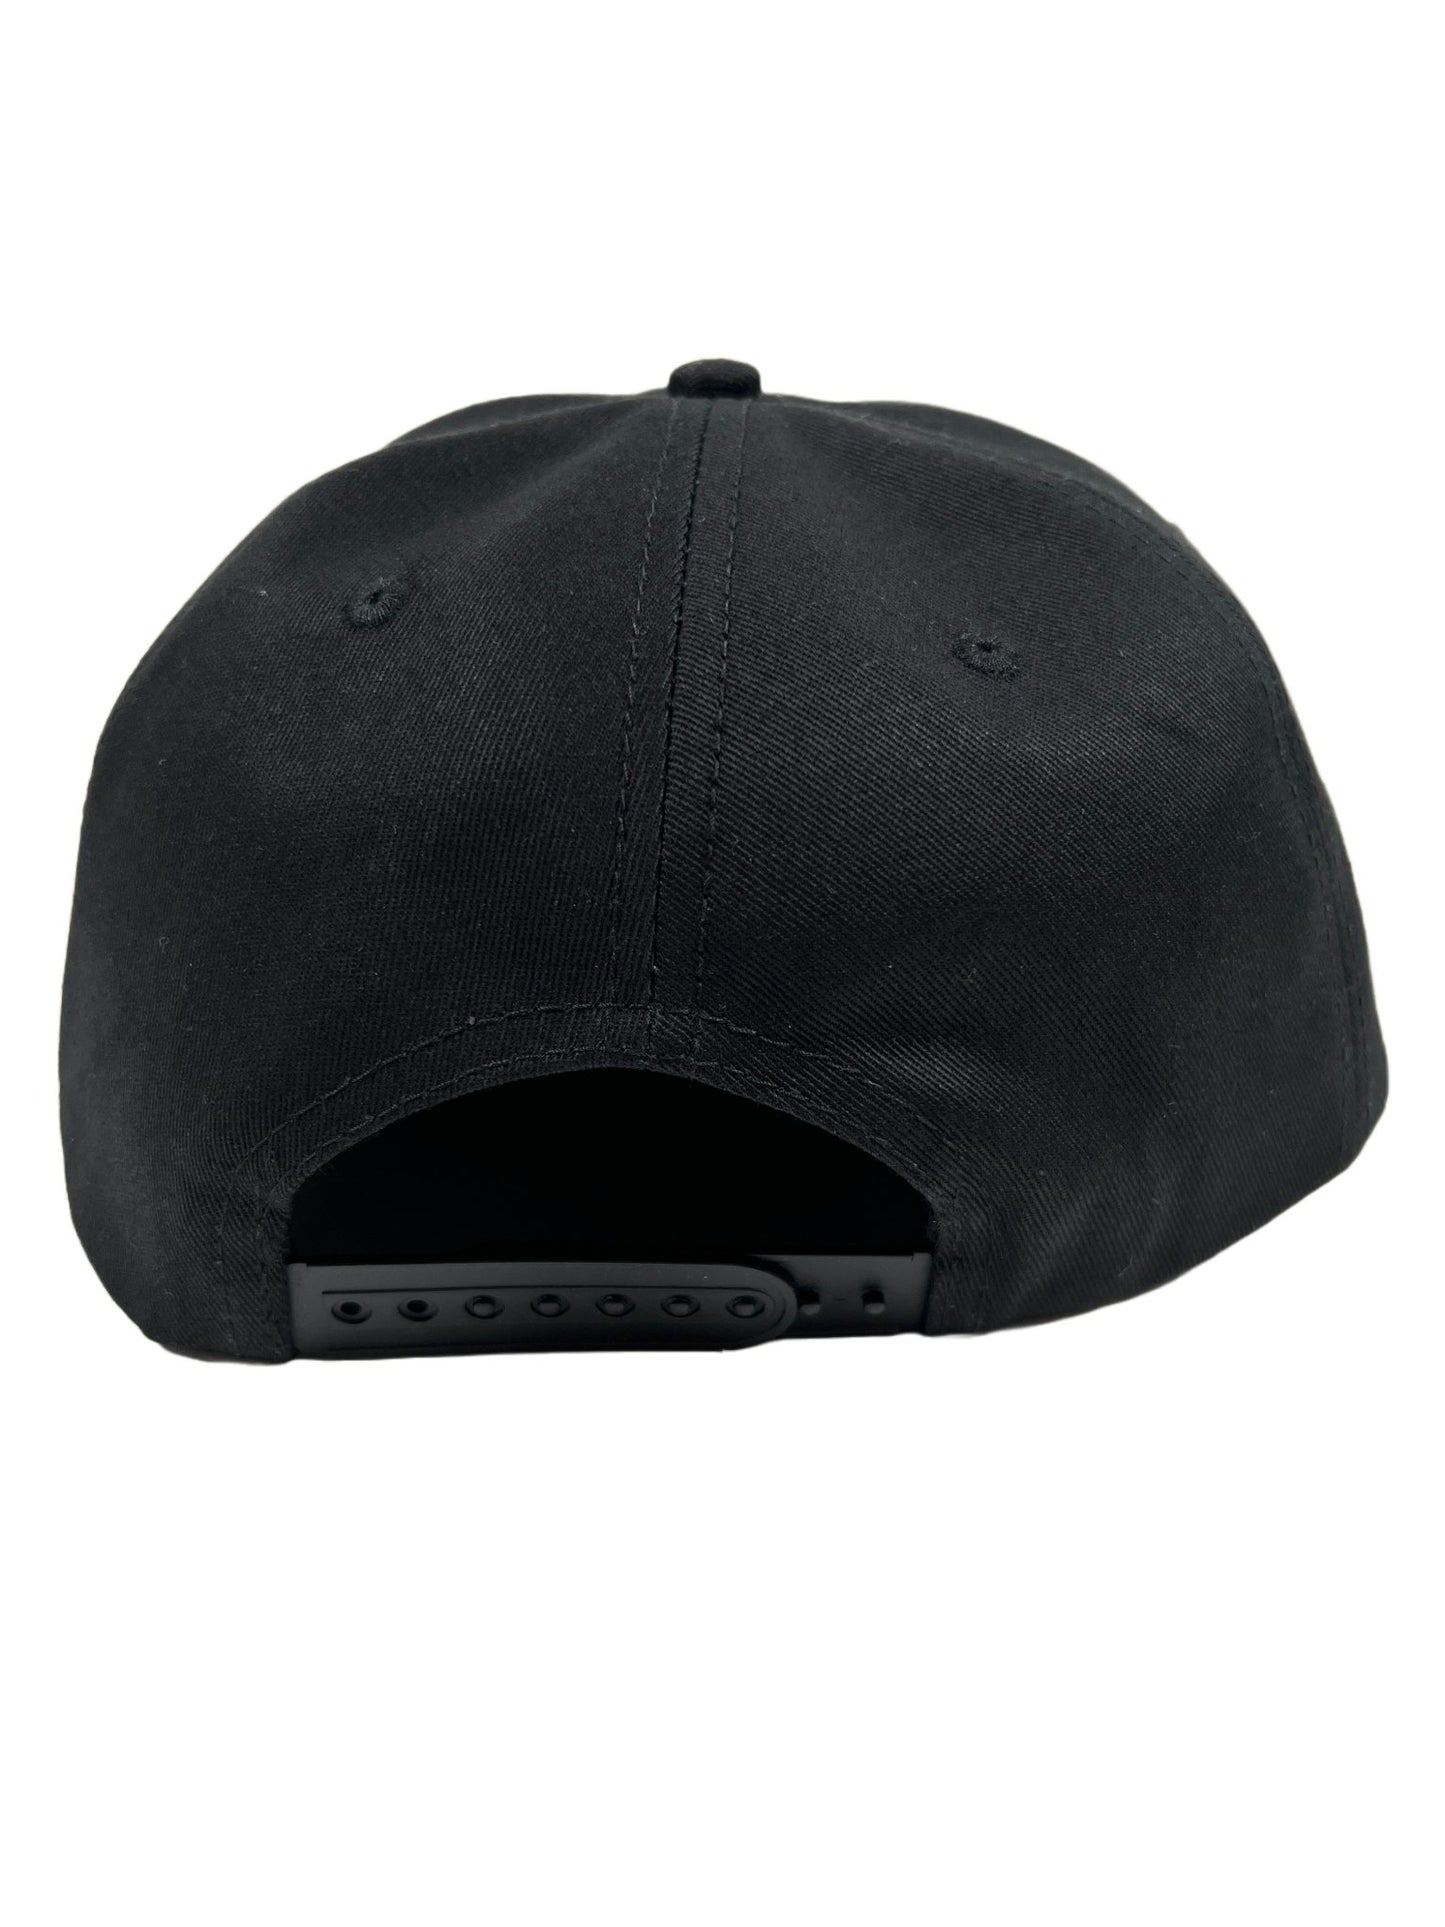 A PLEASURES black embroidered snapback hat on a white background.